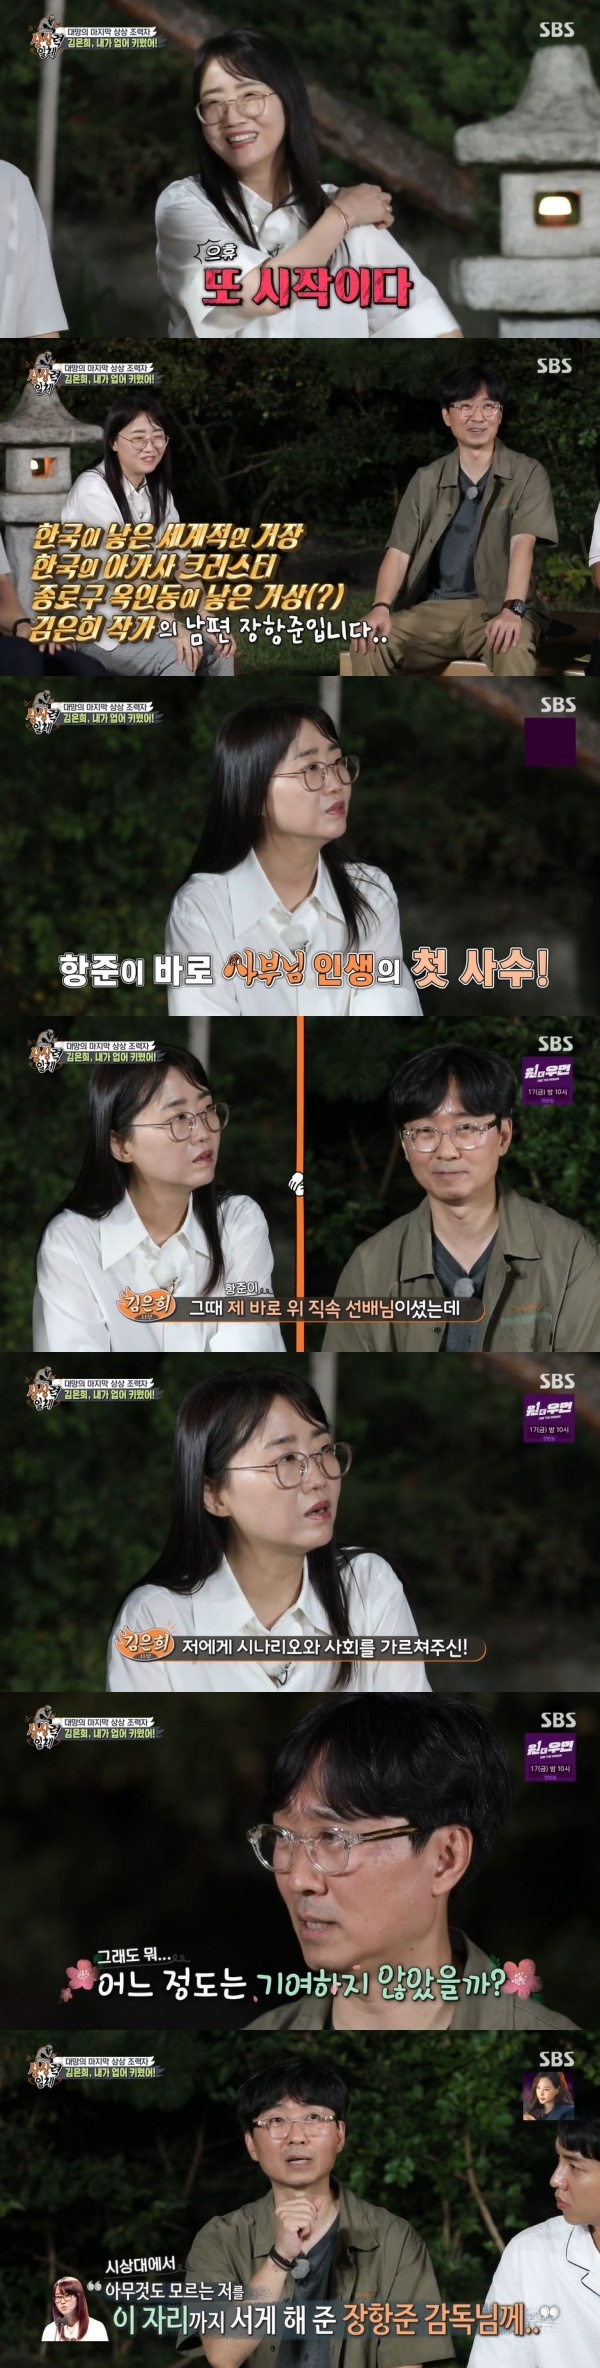 On the SBS entertainment program All The Butlers, which was broadcast on the 12th, Kim Eun-hee, who shows his gratitude for director Jang Hang-jun, was portrayed.Director Jang Hang-jun, who appeared as the last imaginary assistant of Kim Eun-hee, said, It is Husband Jang-jun of Kim Eun-hee writer, who is a world-class master born in Korea, Agatha Christie of Korea,Kim expressed his disapproval of the real couple, saying, It is also a beginning.Kim Eun-hee wrote, Jang Hang-jun is the first shooter of my life.I started working as an entertainer, Kim said. Jang Hang-jun was right above me at that time. He taught me scenarios and society.Jang Hang-jun laughed at the fact that there are three more politics, economy and culture besides society.Meanwhile, All The Butlers is a life tutoring entertainment program with youths full of question marks and myway geek masters.It airs every Sunday at 6:25 p.m.Photo SBS broadcast screen capture